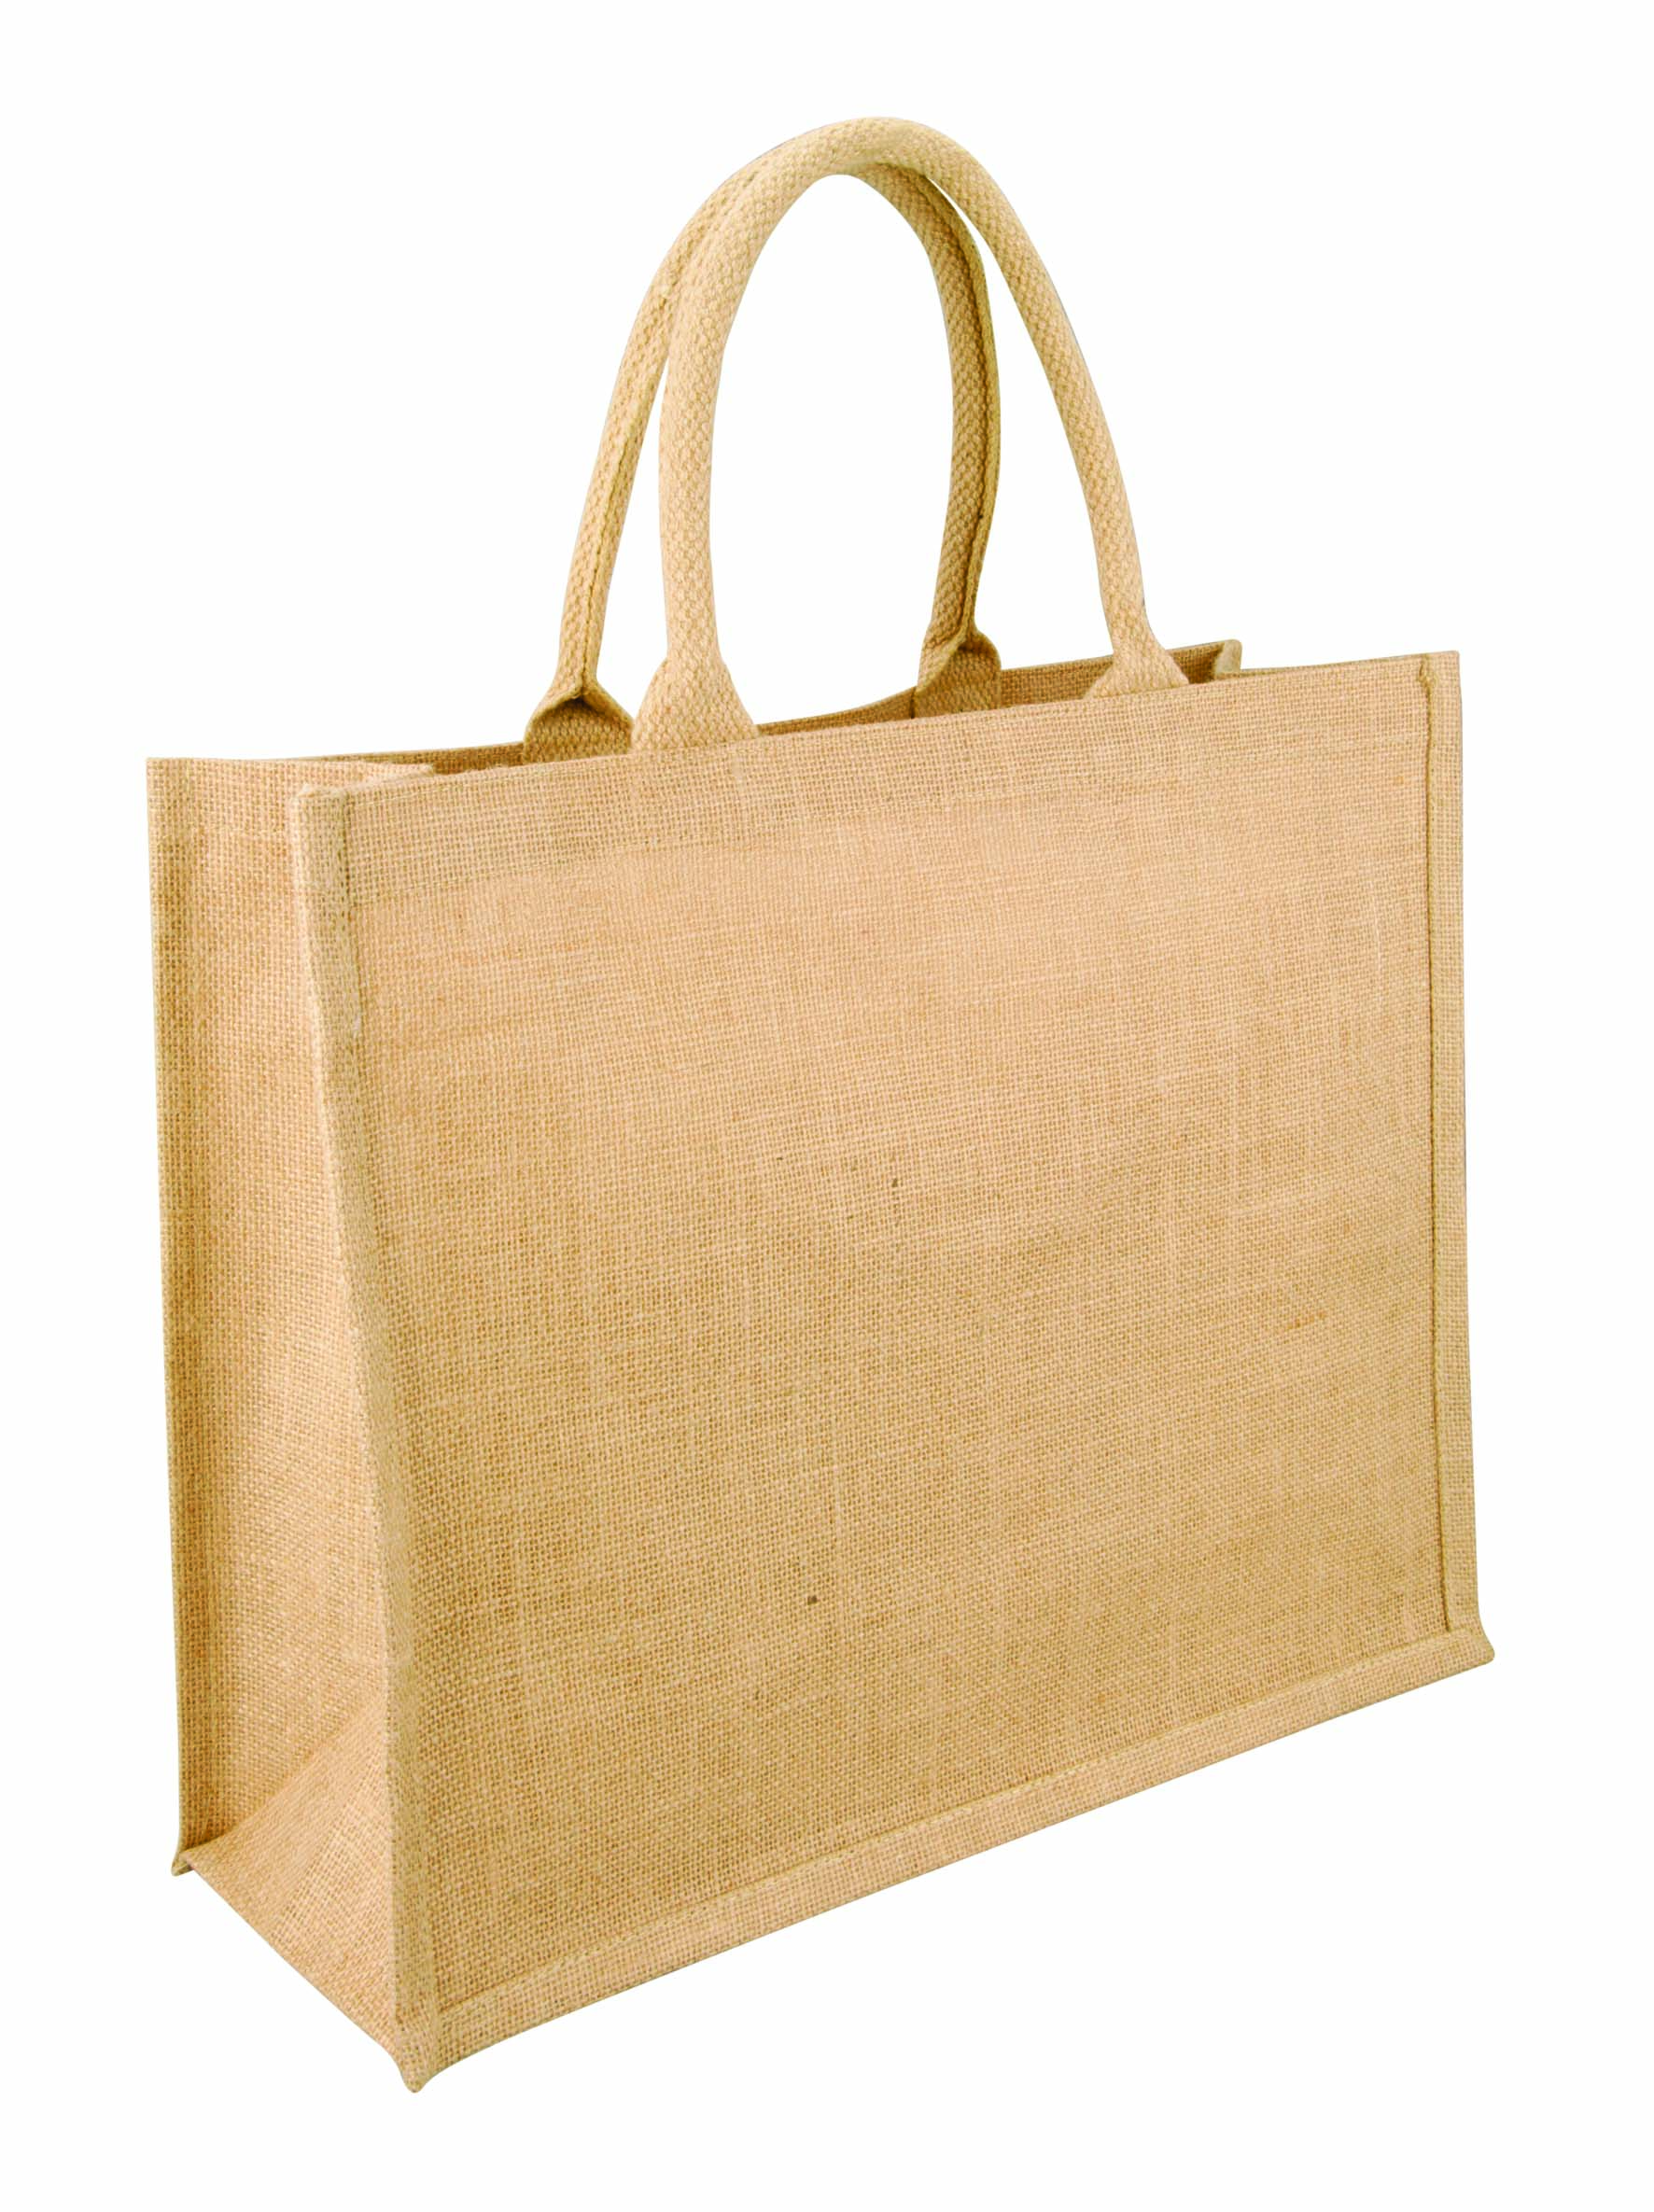 Jute bags - Buy Jute Bags Online From manufacturer, Exporter and Supplier in India | 0